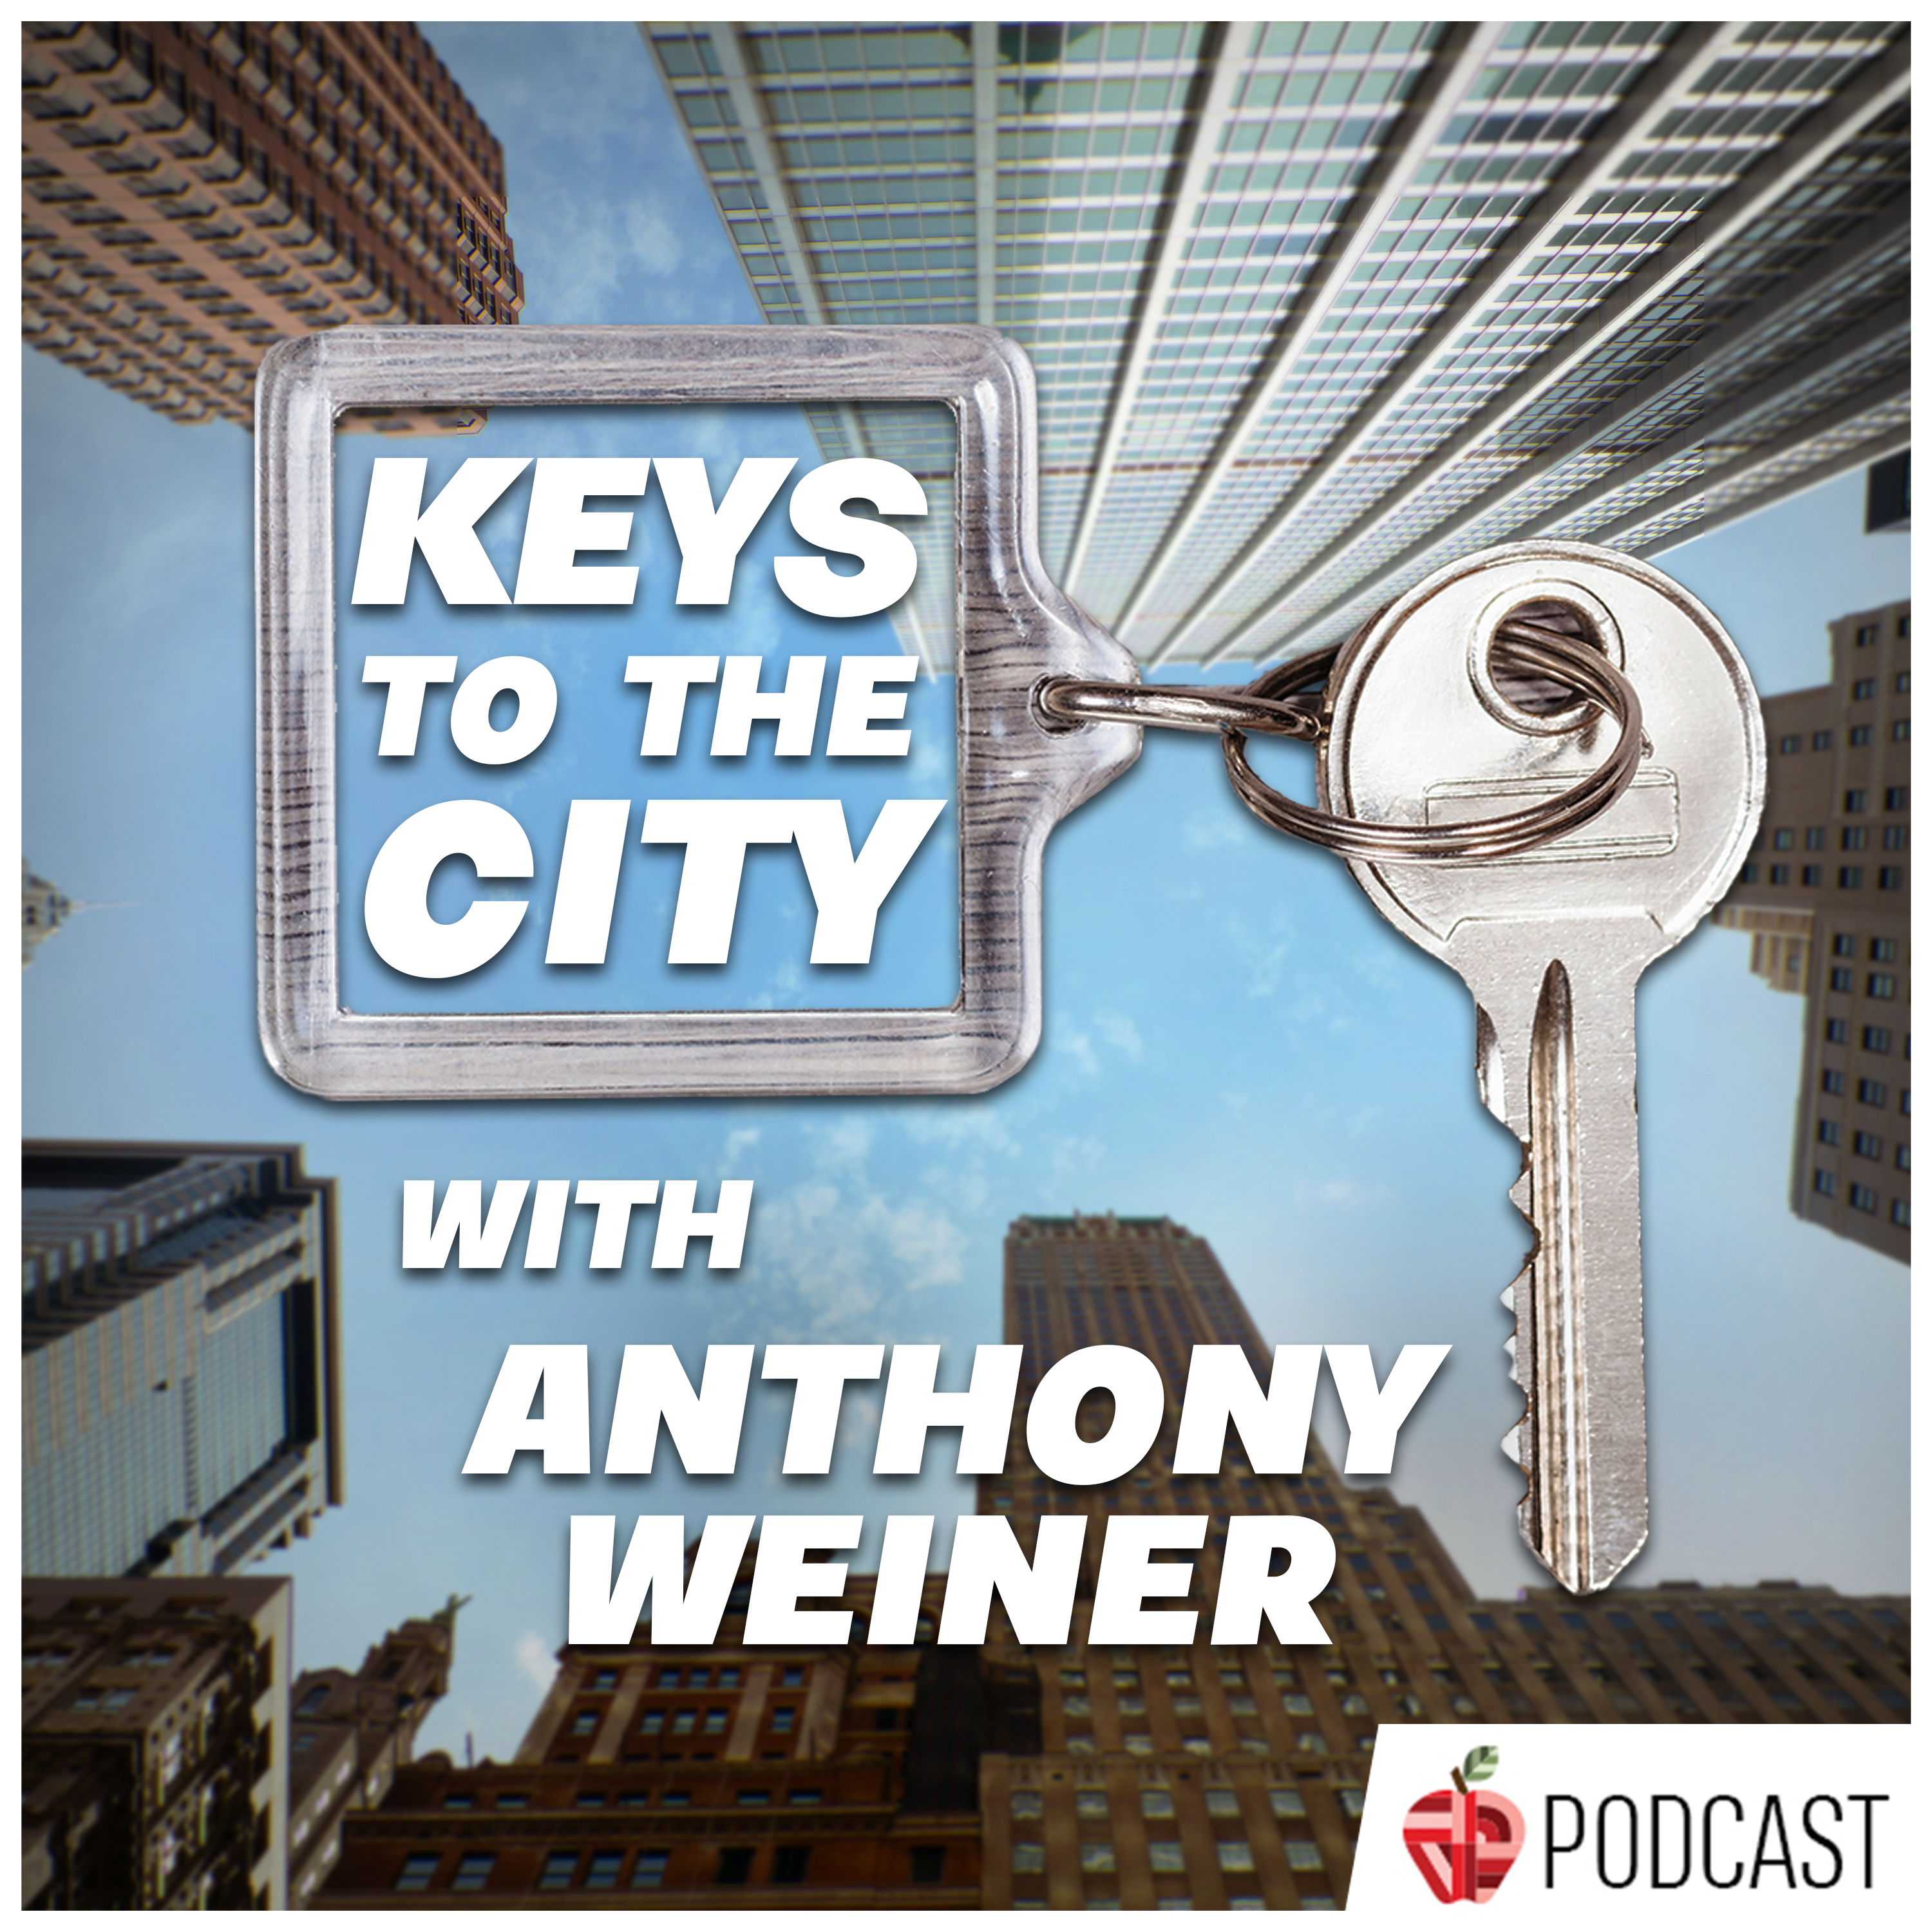 Keys to the City with Anthony Weiner